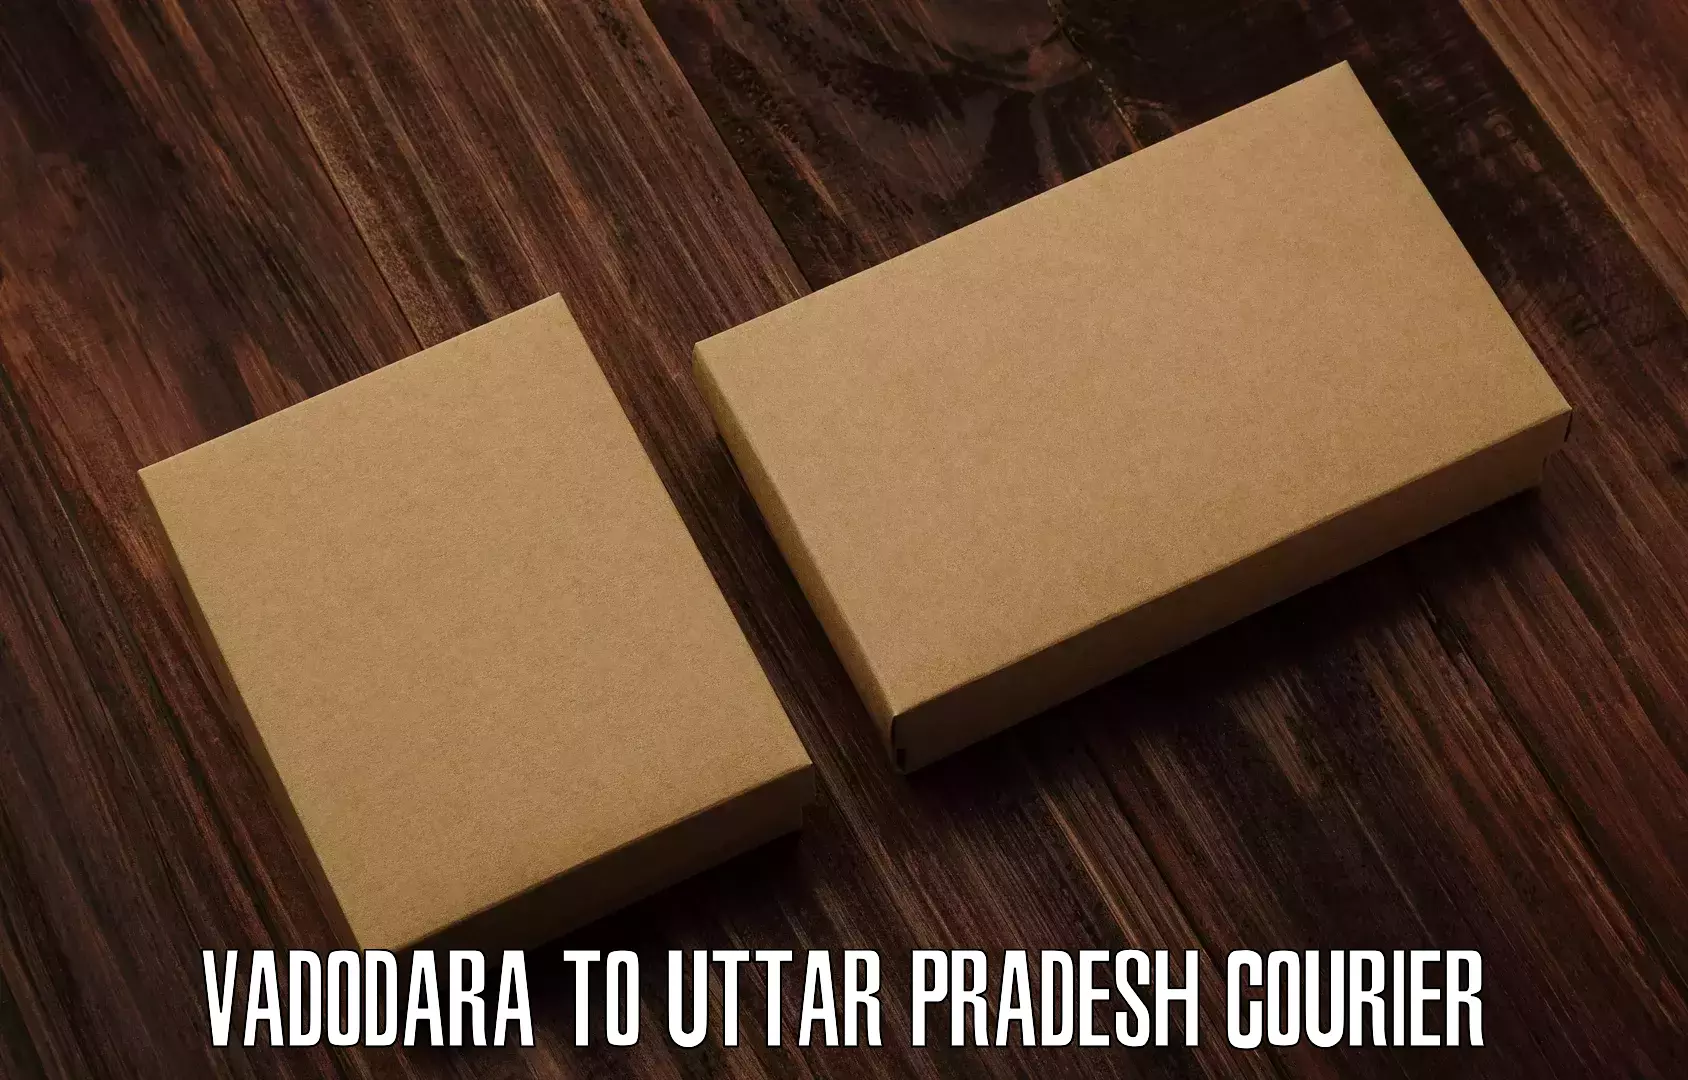 Next-day delivery options in Vadodara to Kairana